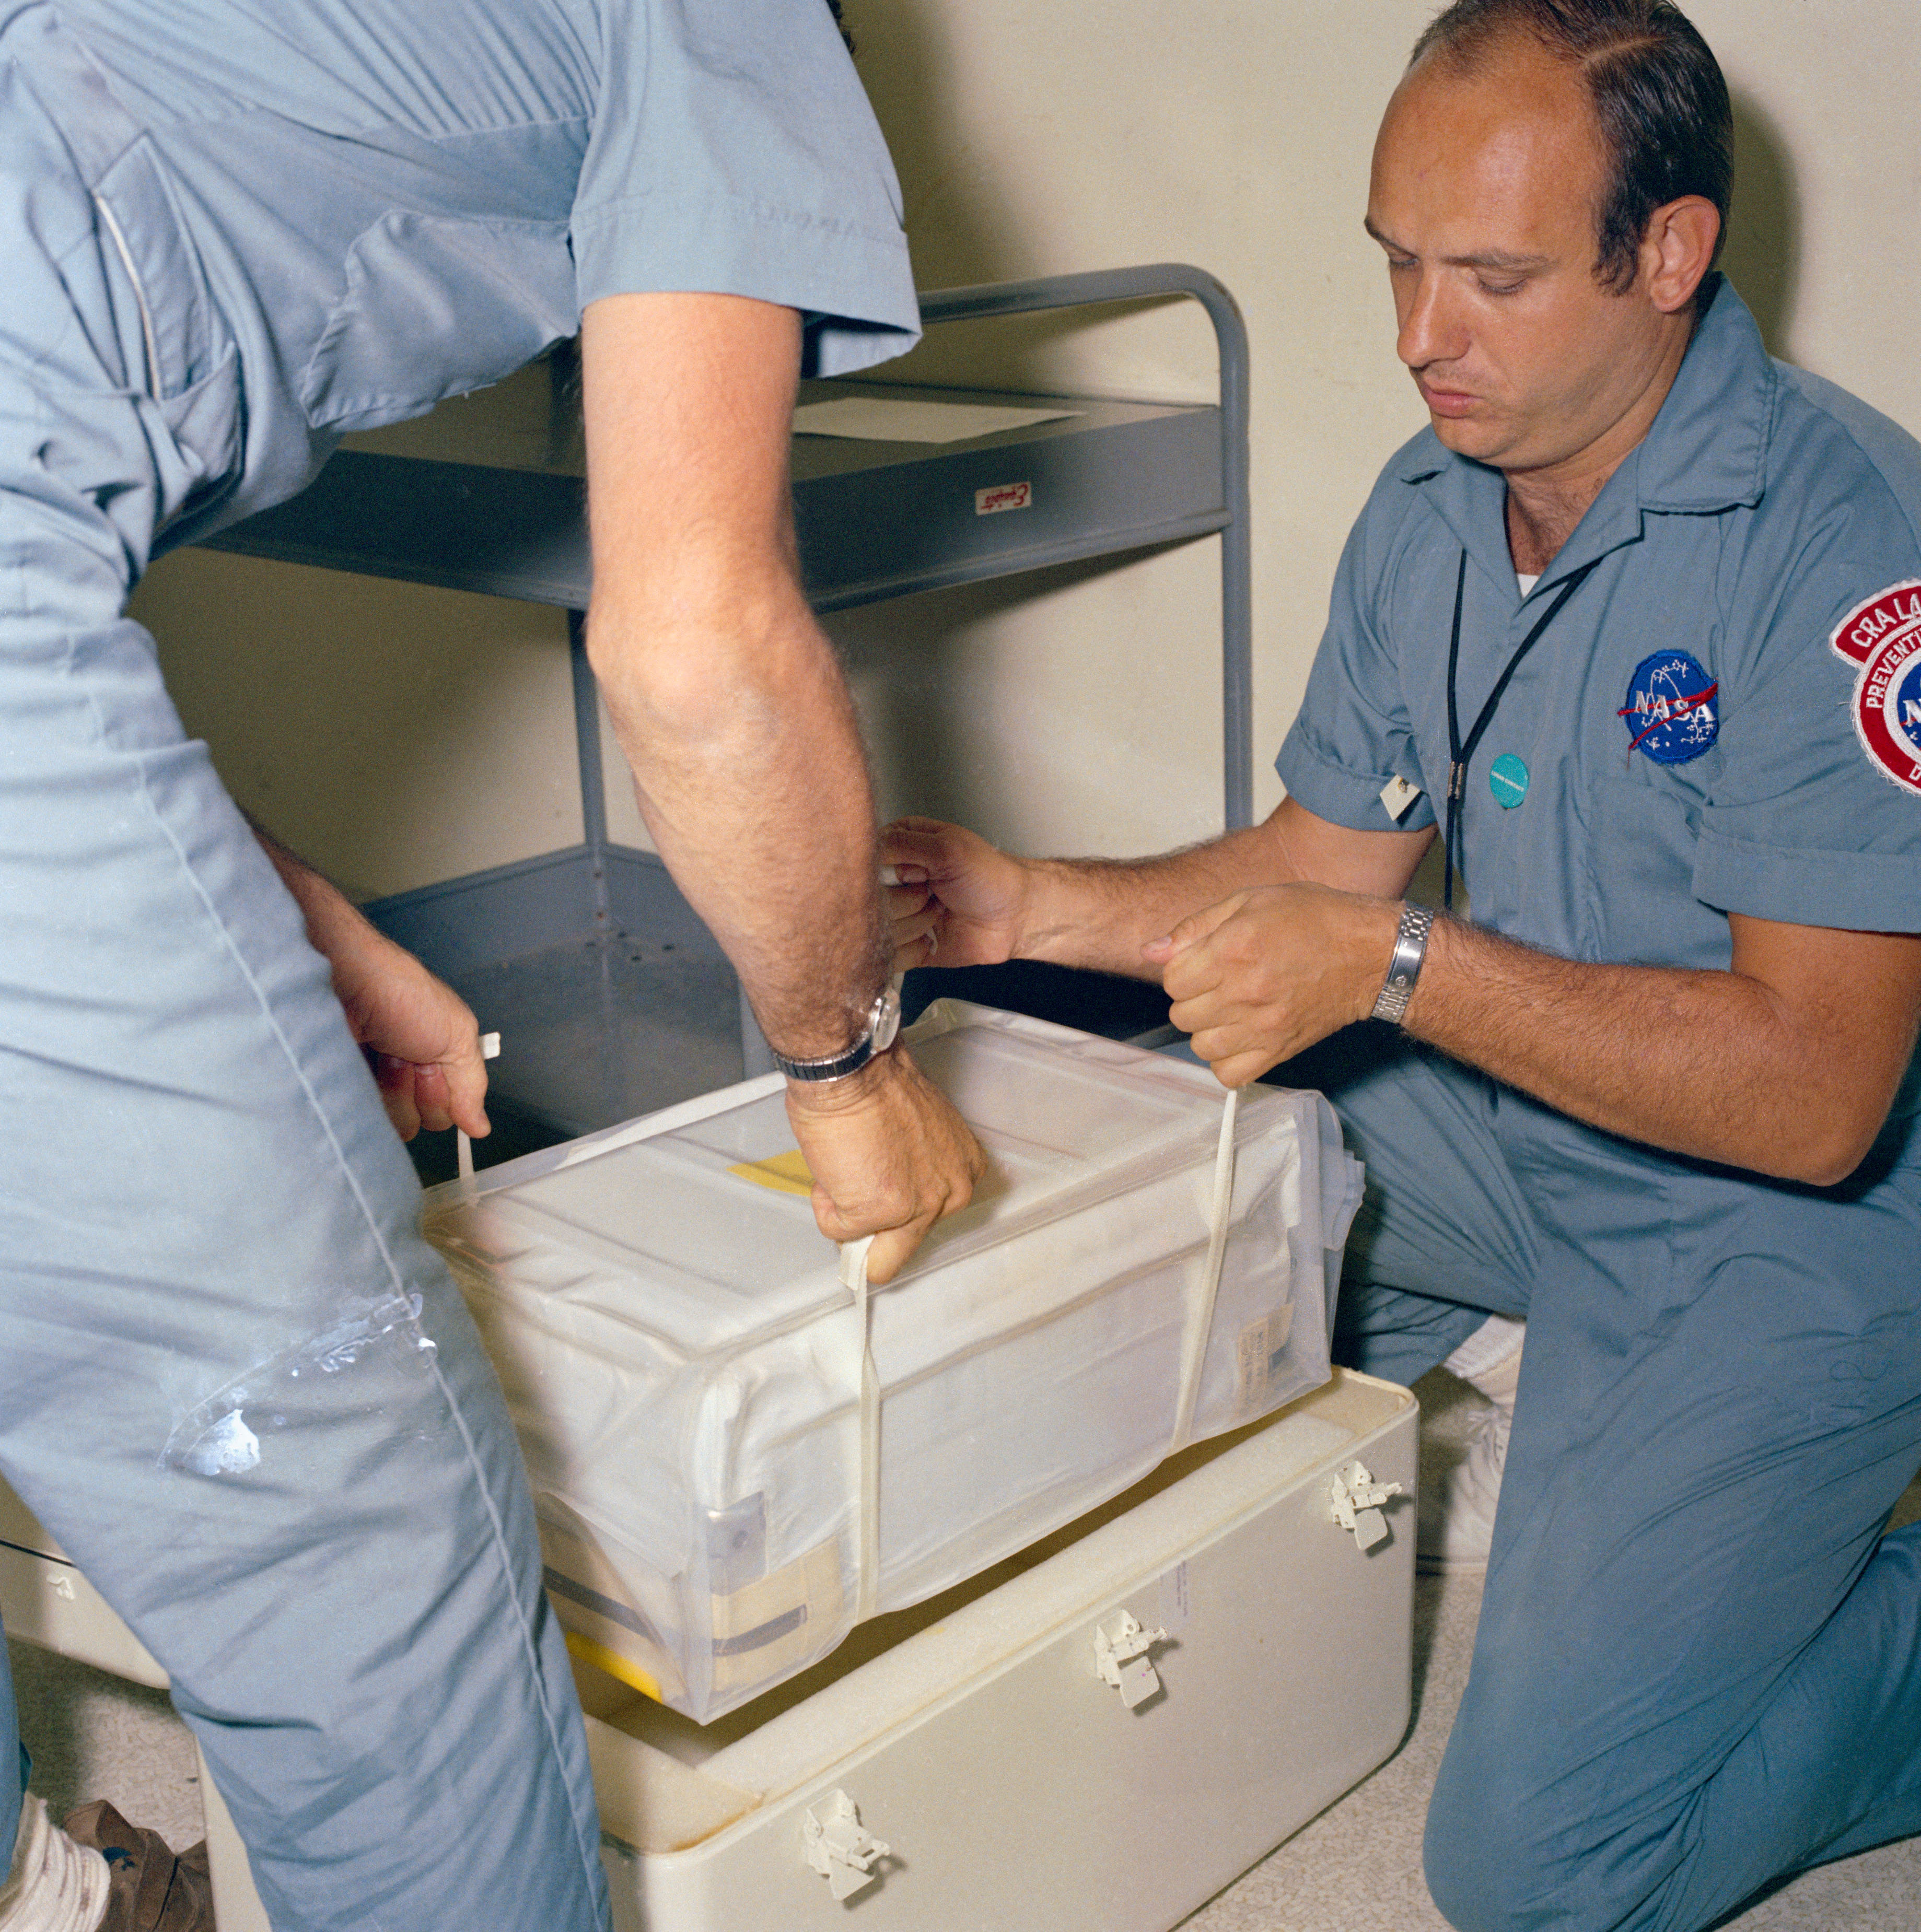 In the LRL, technicians at MSC unpack the first box of Moon rocks